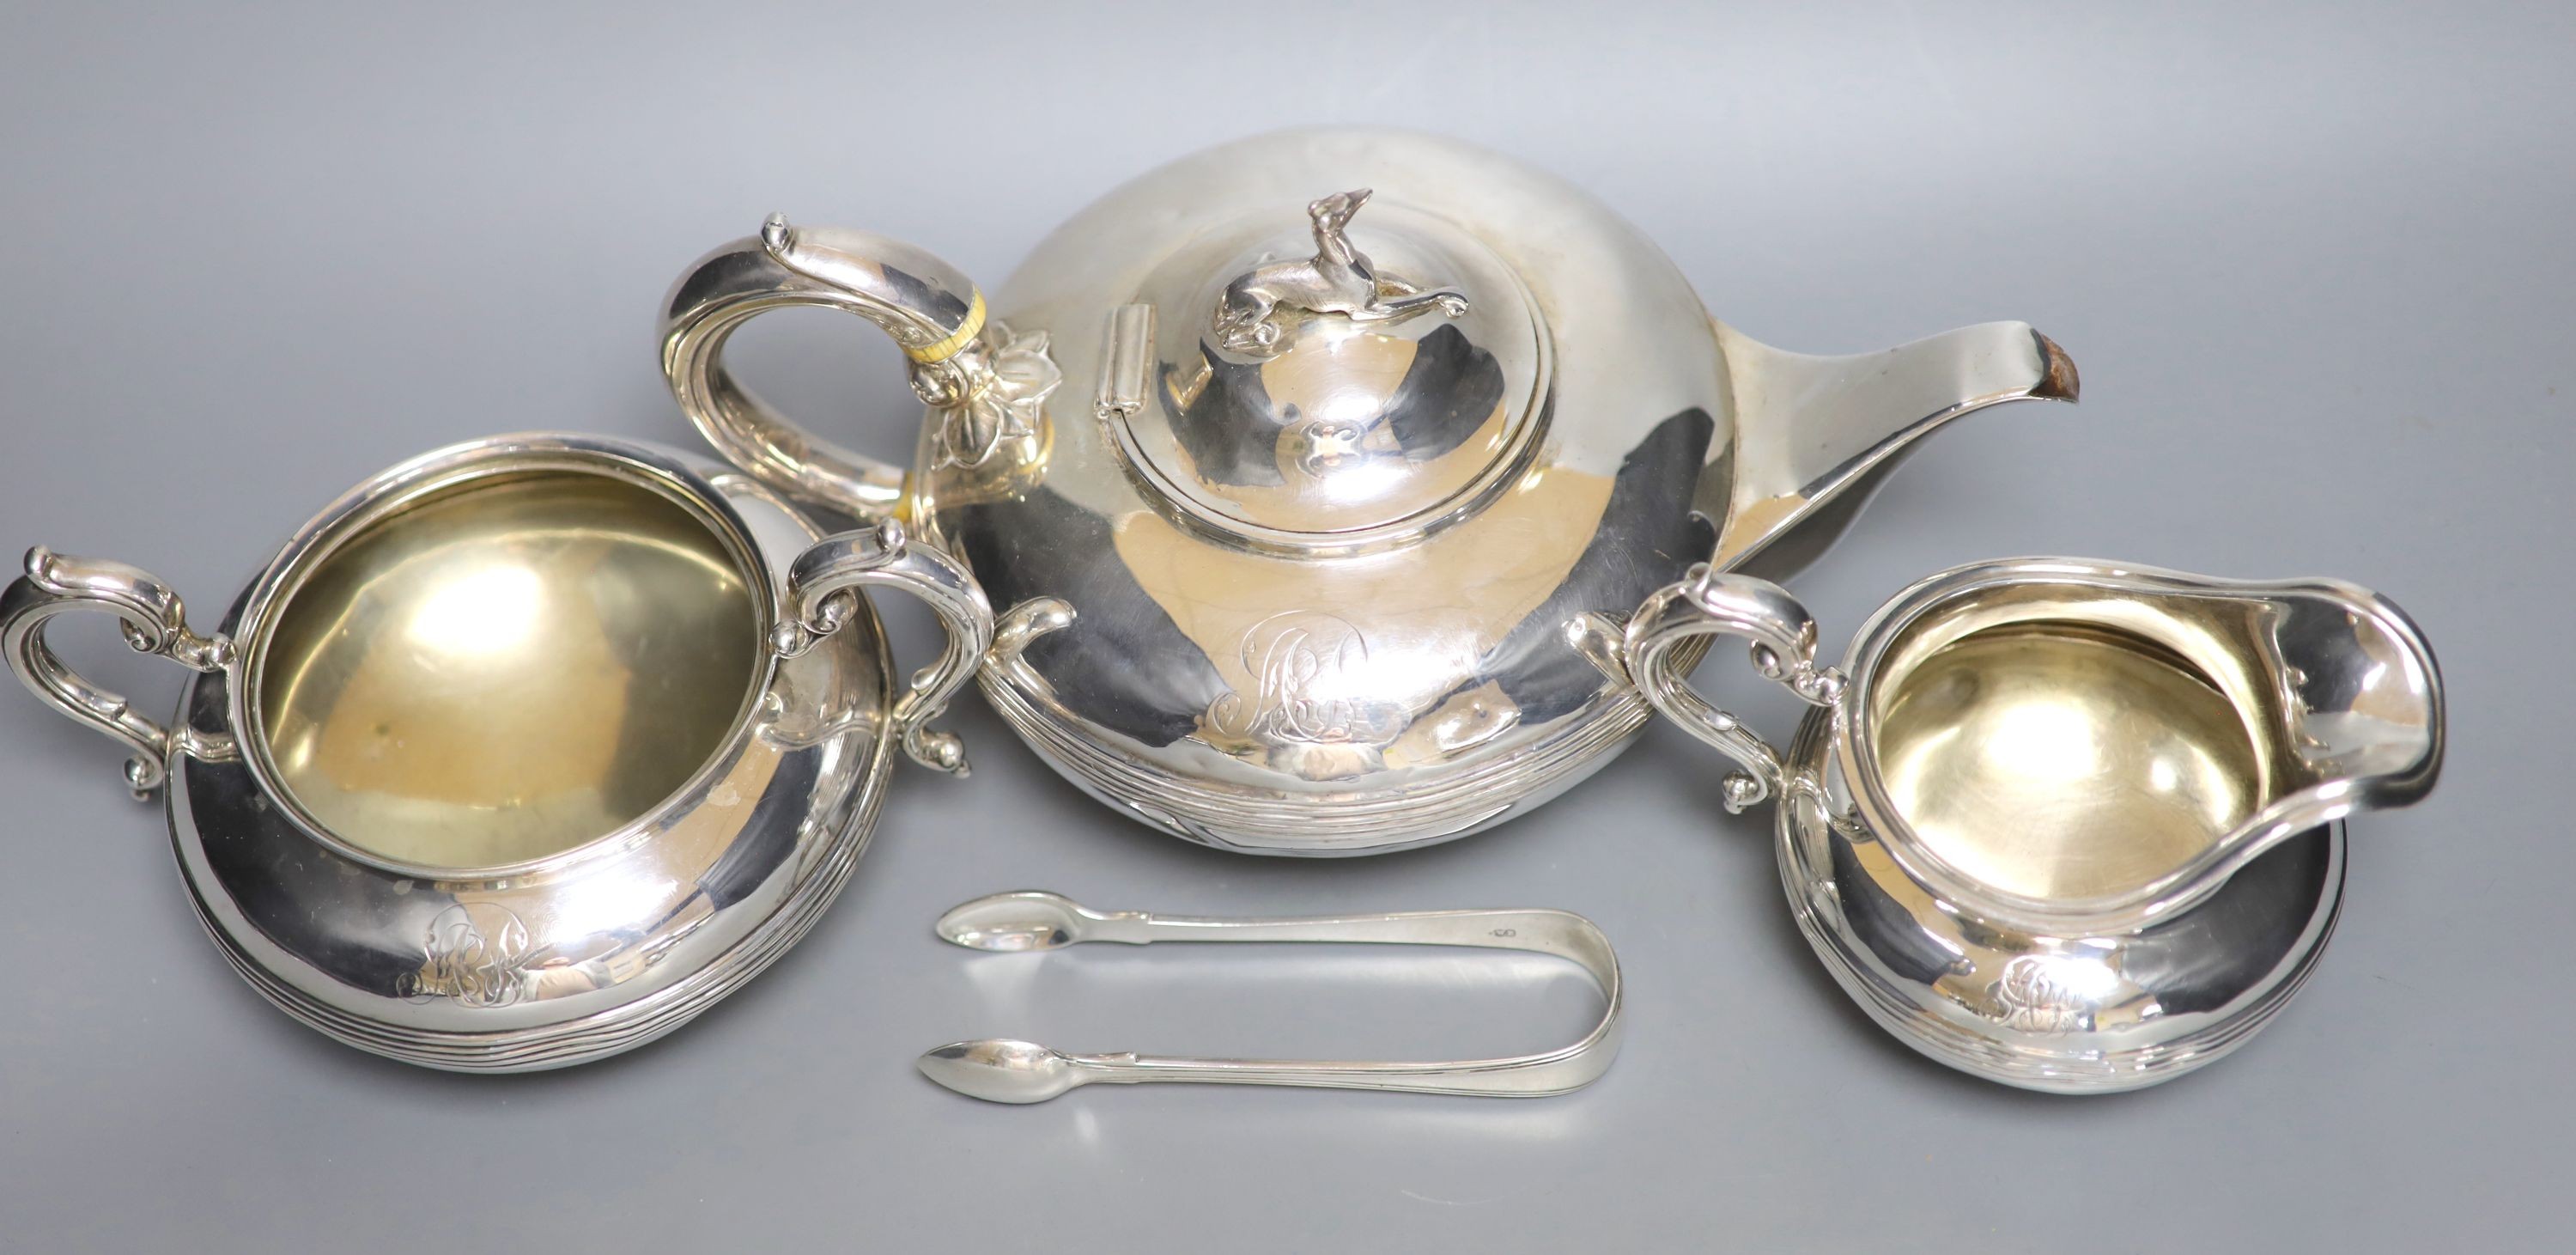 A Victorian silver three piece silver tea set, William Smily, London, 1856 and a pair of earlier silver sugar tongs, gross weight 40 oz.